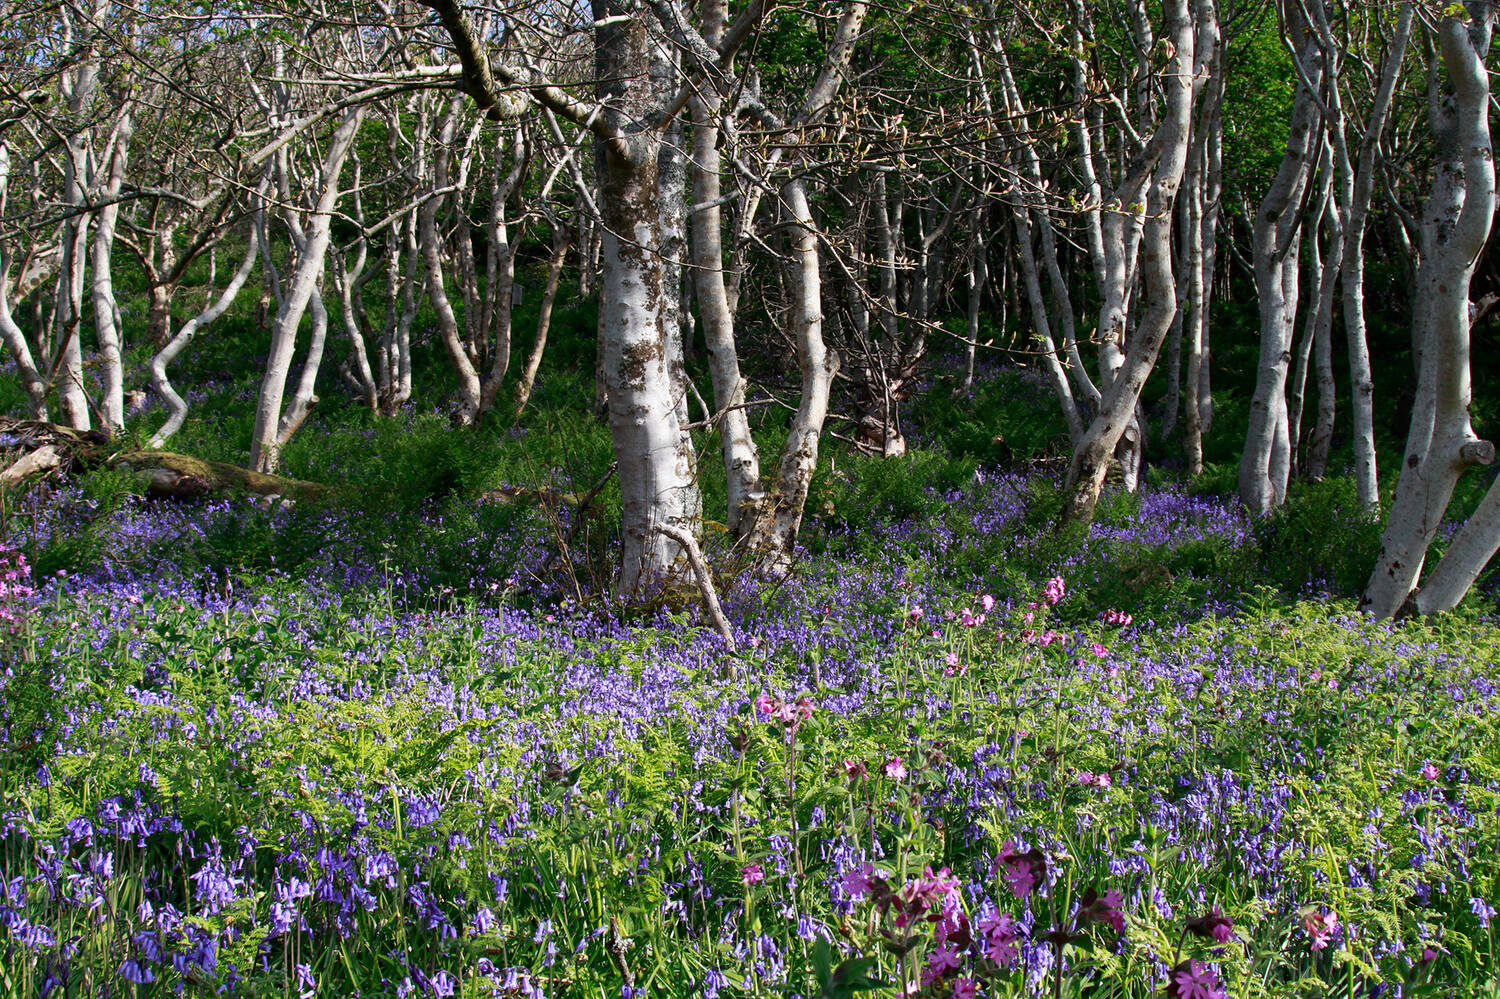 The woodland on Canna, carpeted with bluebells in spring